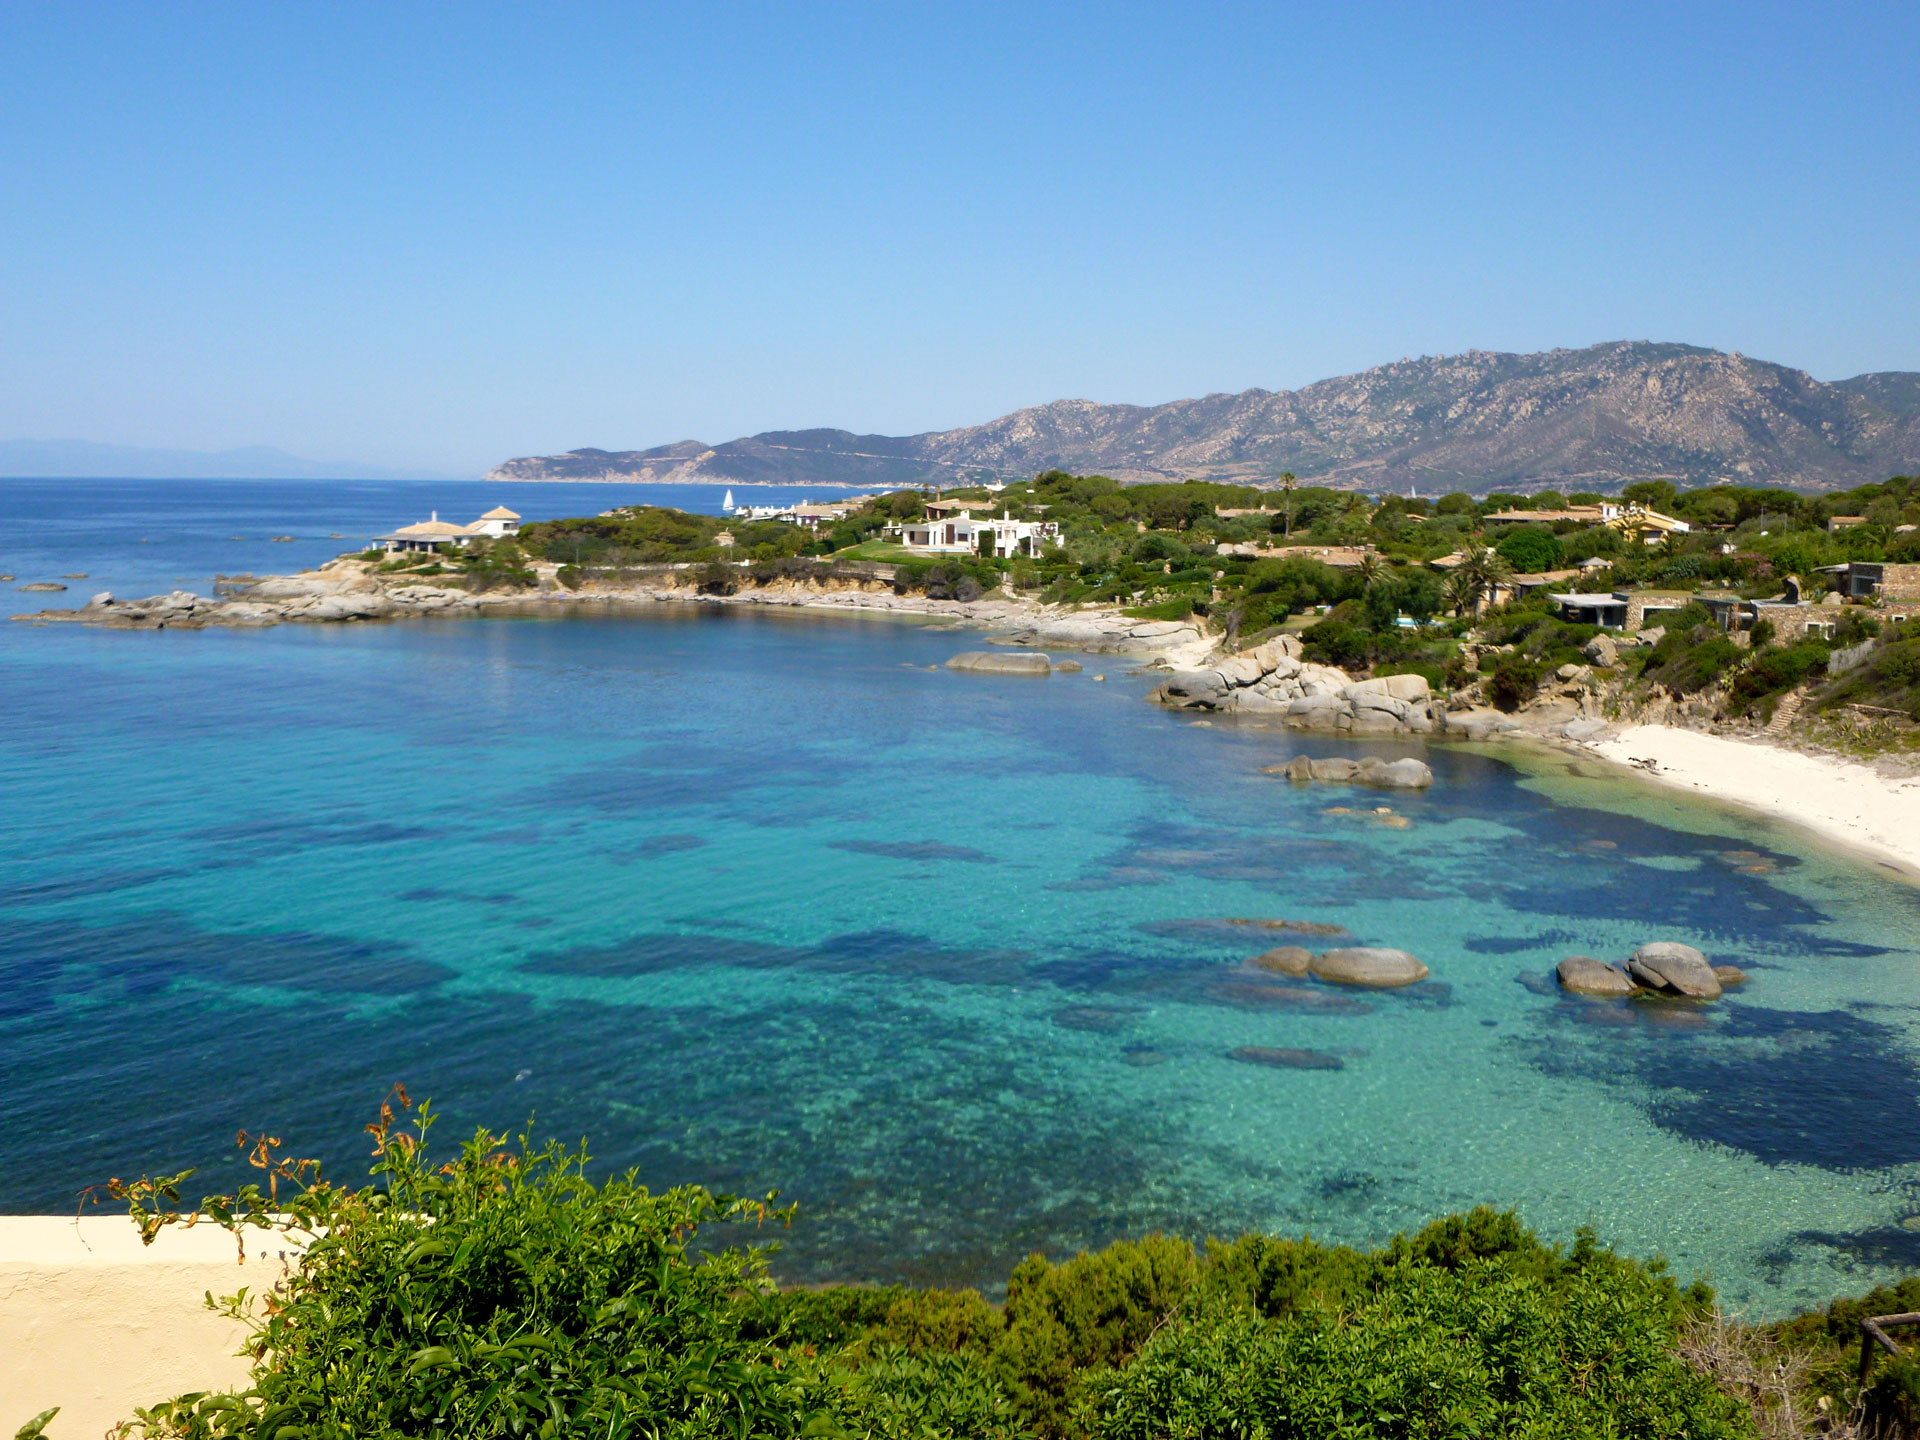 Bay of Cala Caterina, with direct access from the Villa